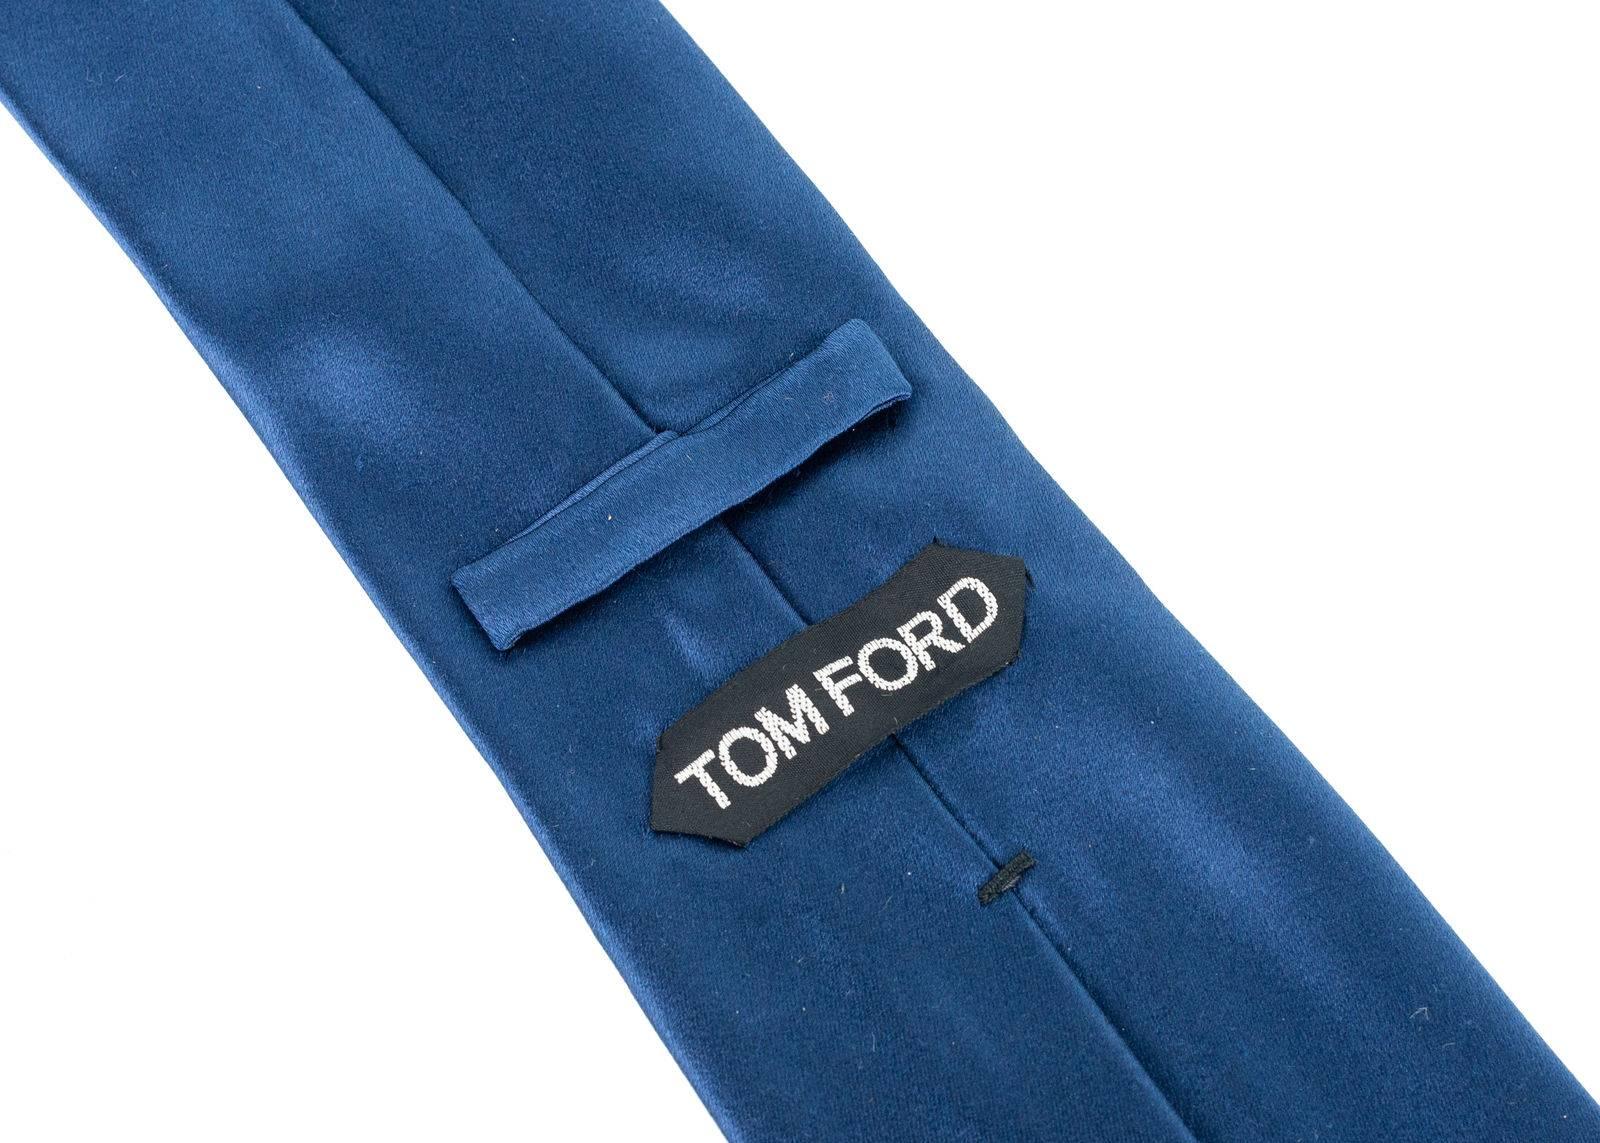 Italian luxury brand, Tom Ford, has crafted these gorgeous Knit and Silk Tie for important special occasions and professional events. The tie is great to pair with your favorite solid color button down and blazers with your chosen pair or classic